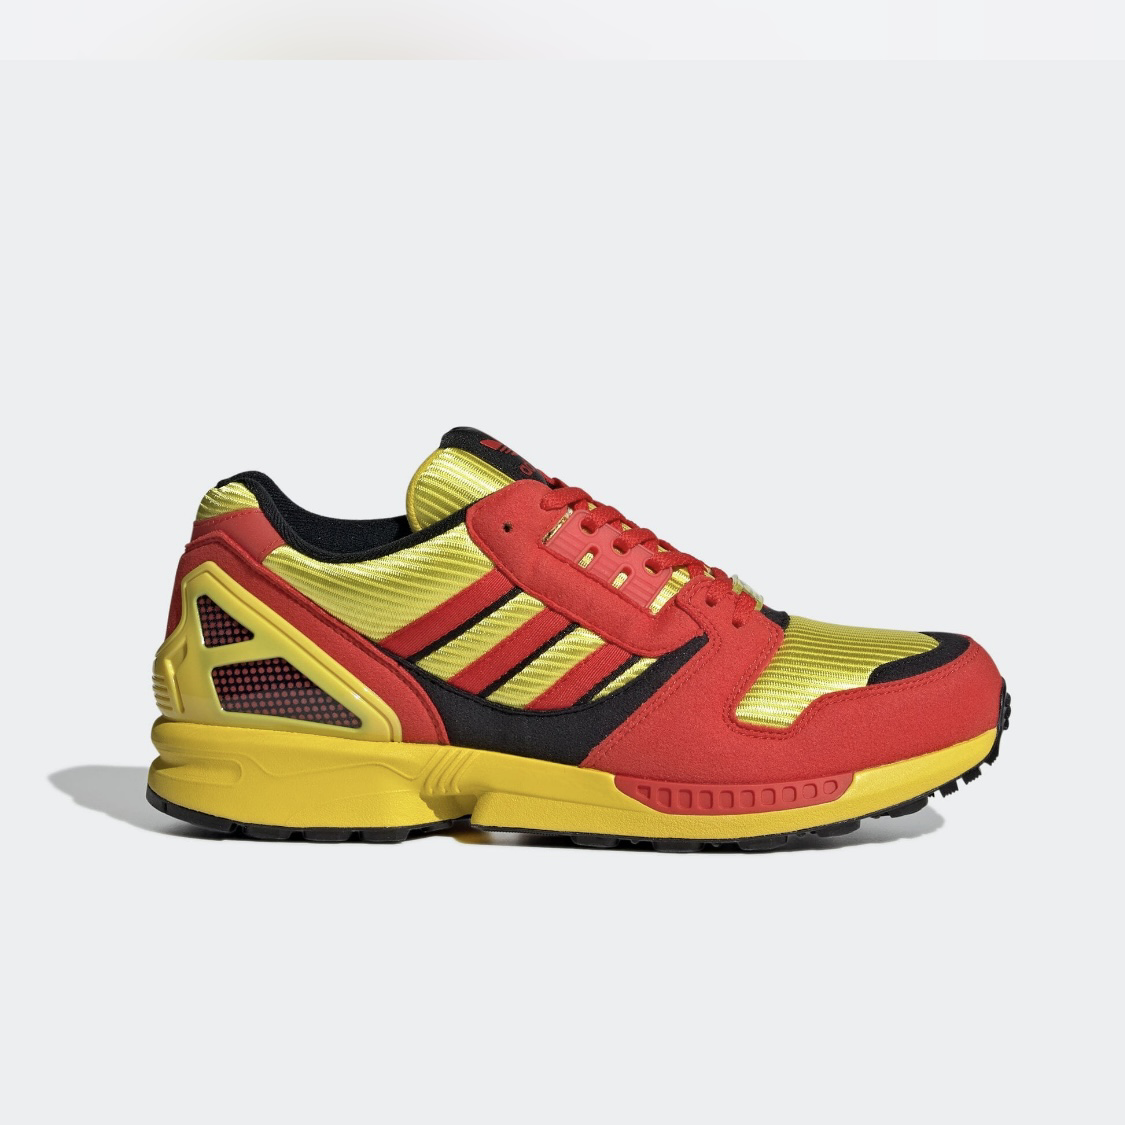 Atmos adidas ZX 8000 Germany Bright Yellowcore Black/Red 22SS-S GY4682  US10size